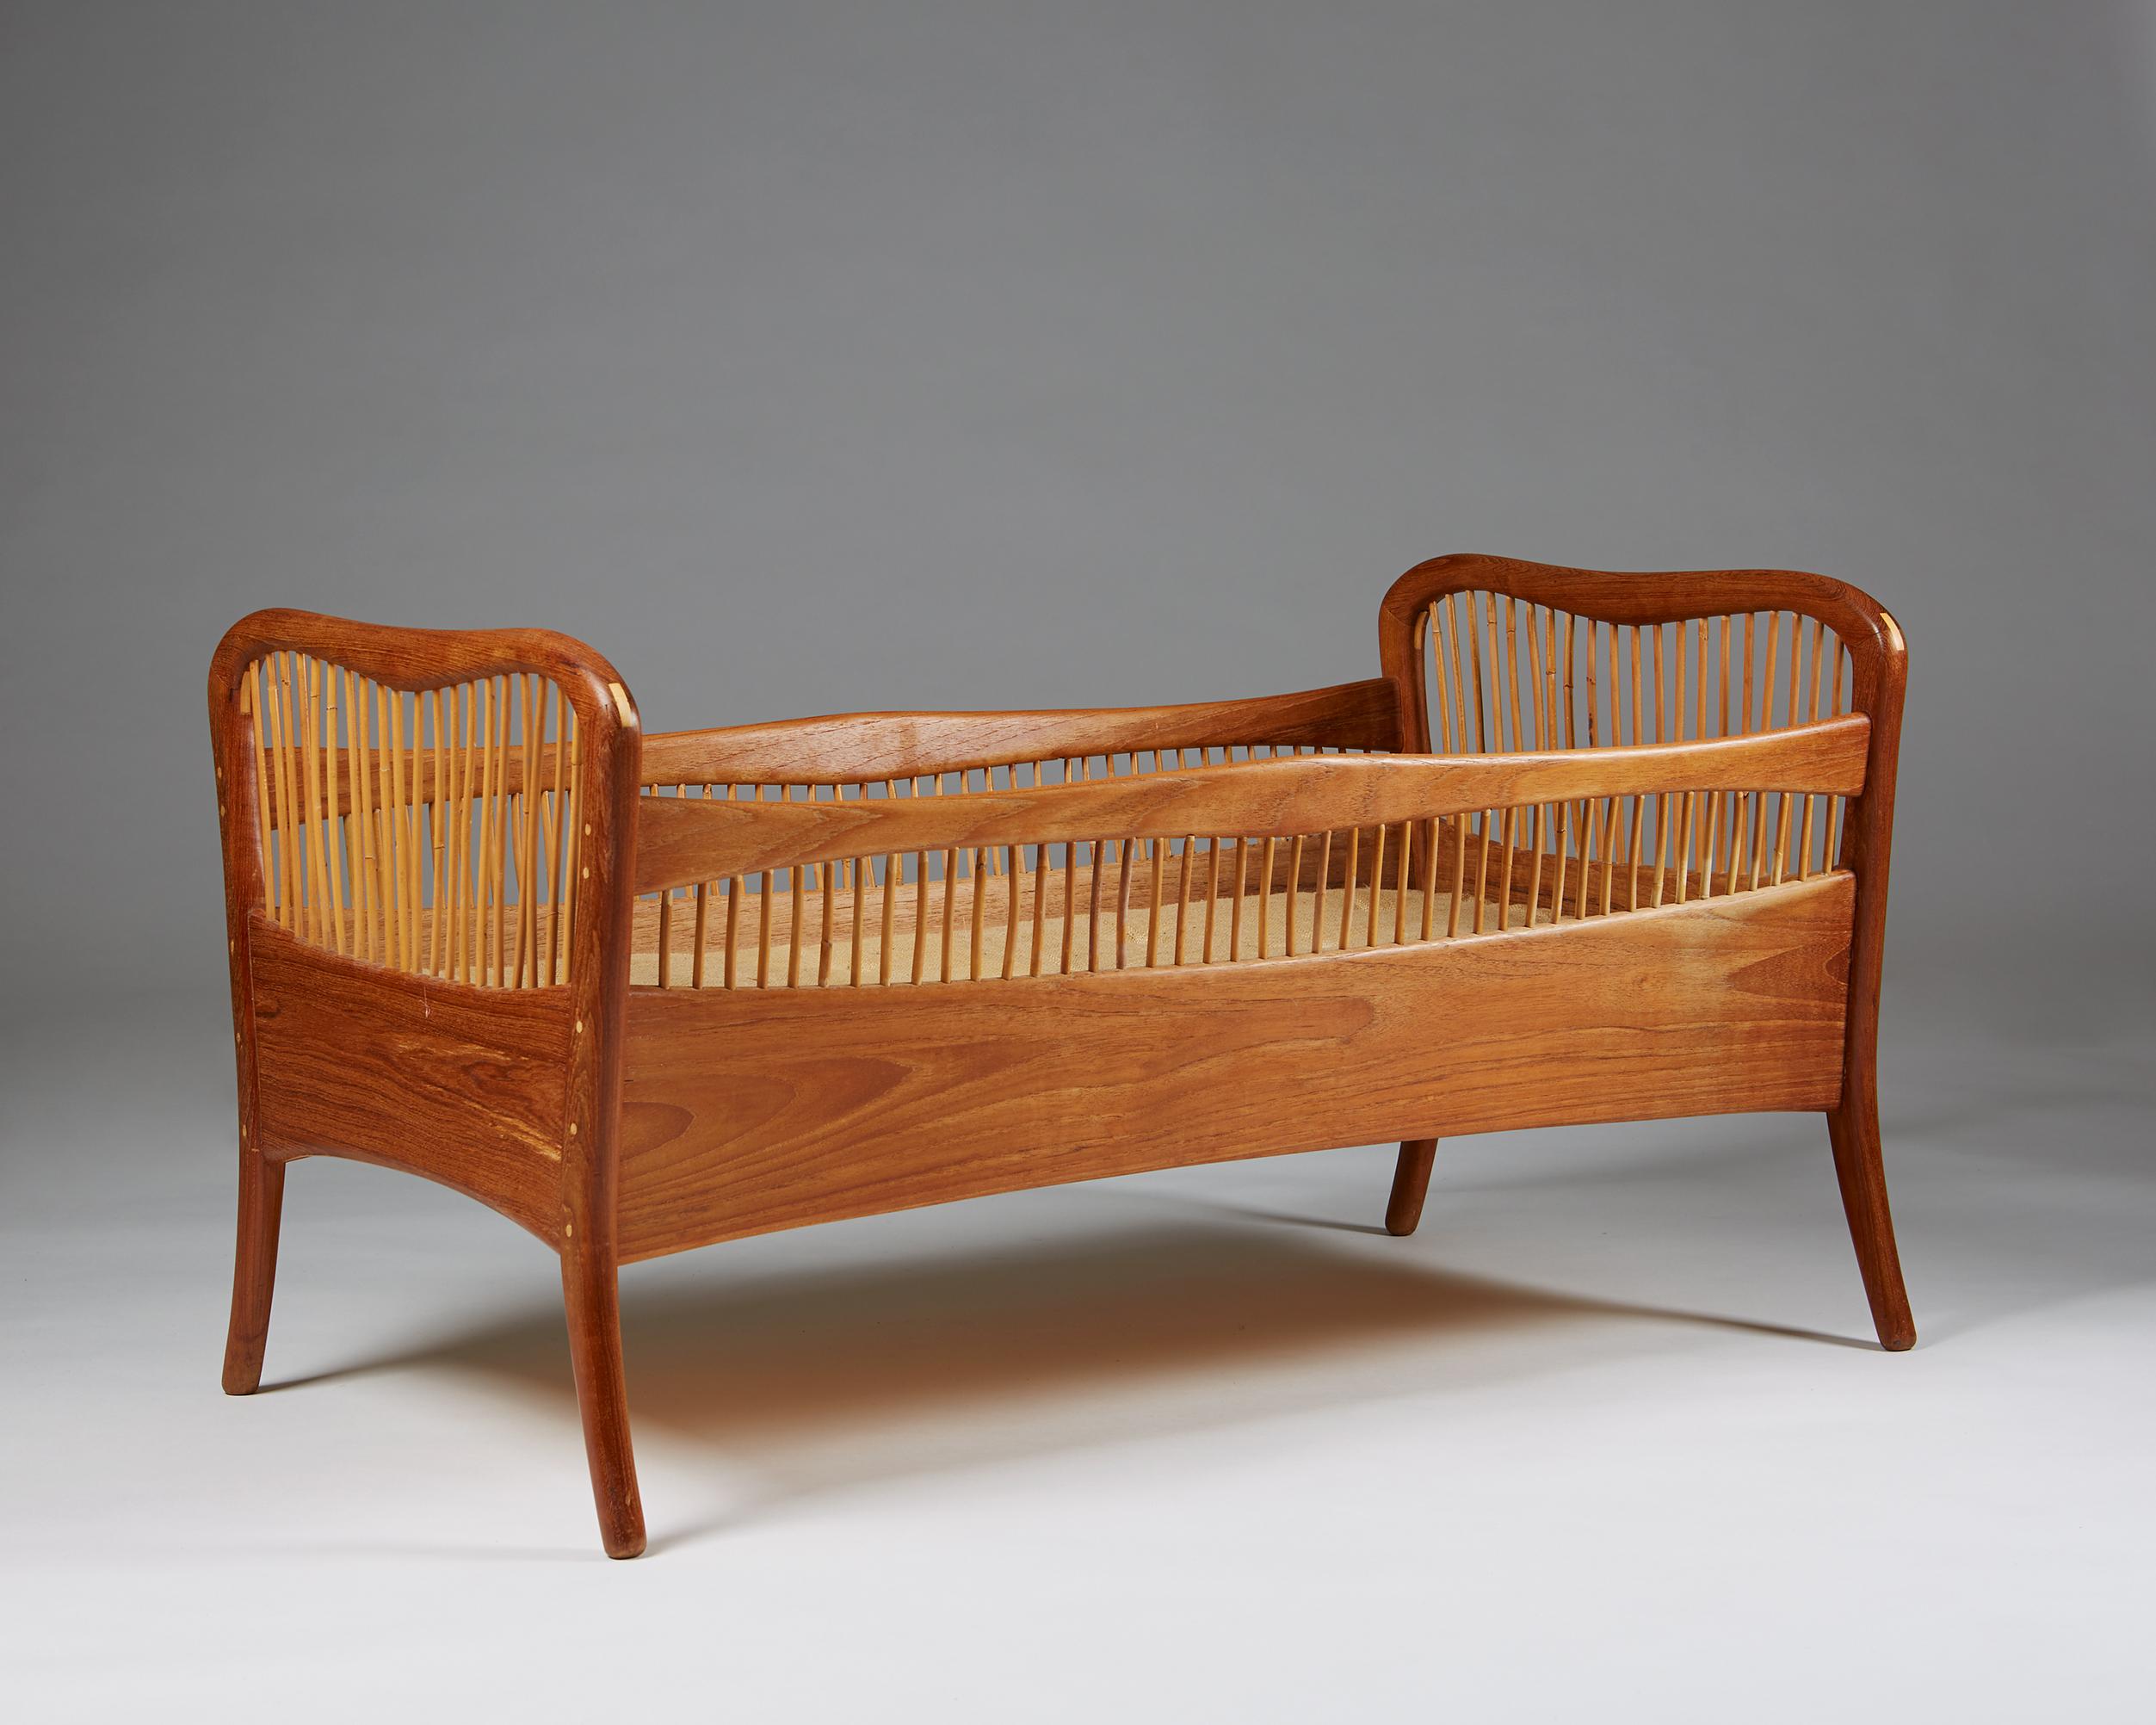 Childrens bed, anonymous, in the style of Peder Moos, made by cabinetmaker Ove Sørensen
Denmark. 1960-1961.

Teak with boxwood dowel pin joints, bamboo, and original mattress upholstered in hessian.

Dimensions:
L: 105 cm/ 3' 5 3/4''
W: 60 cm/ 23